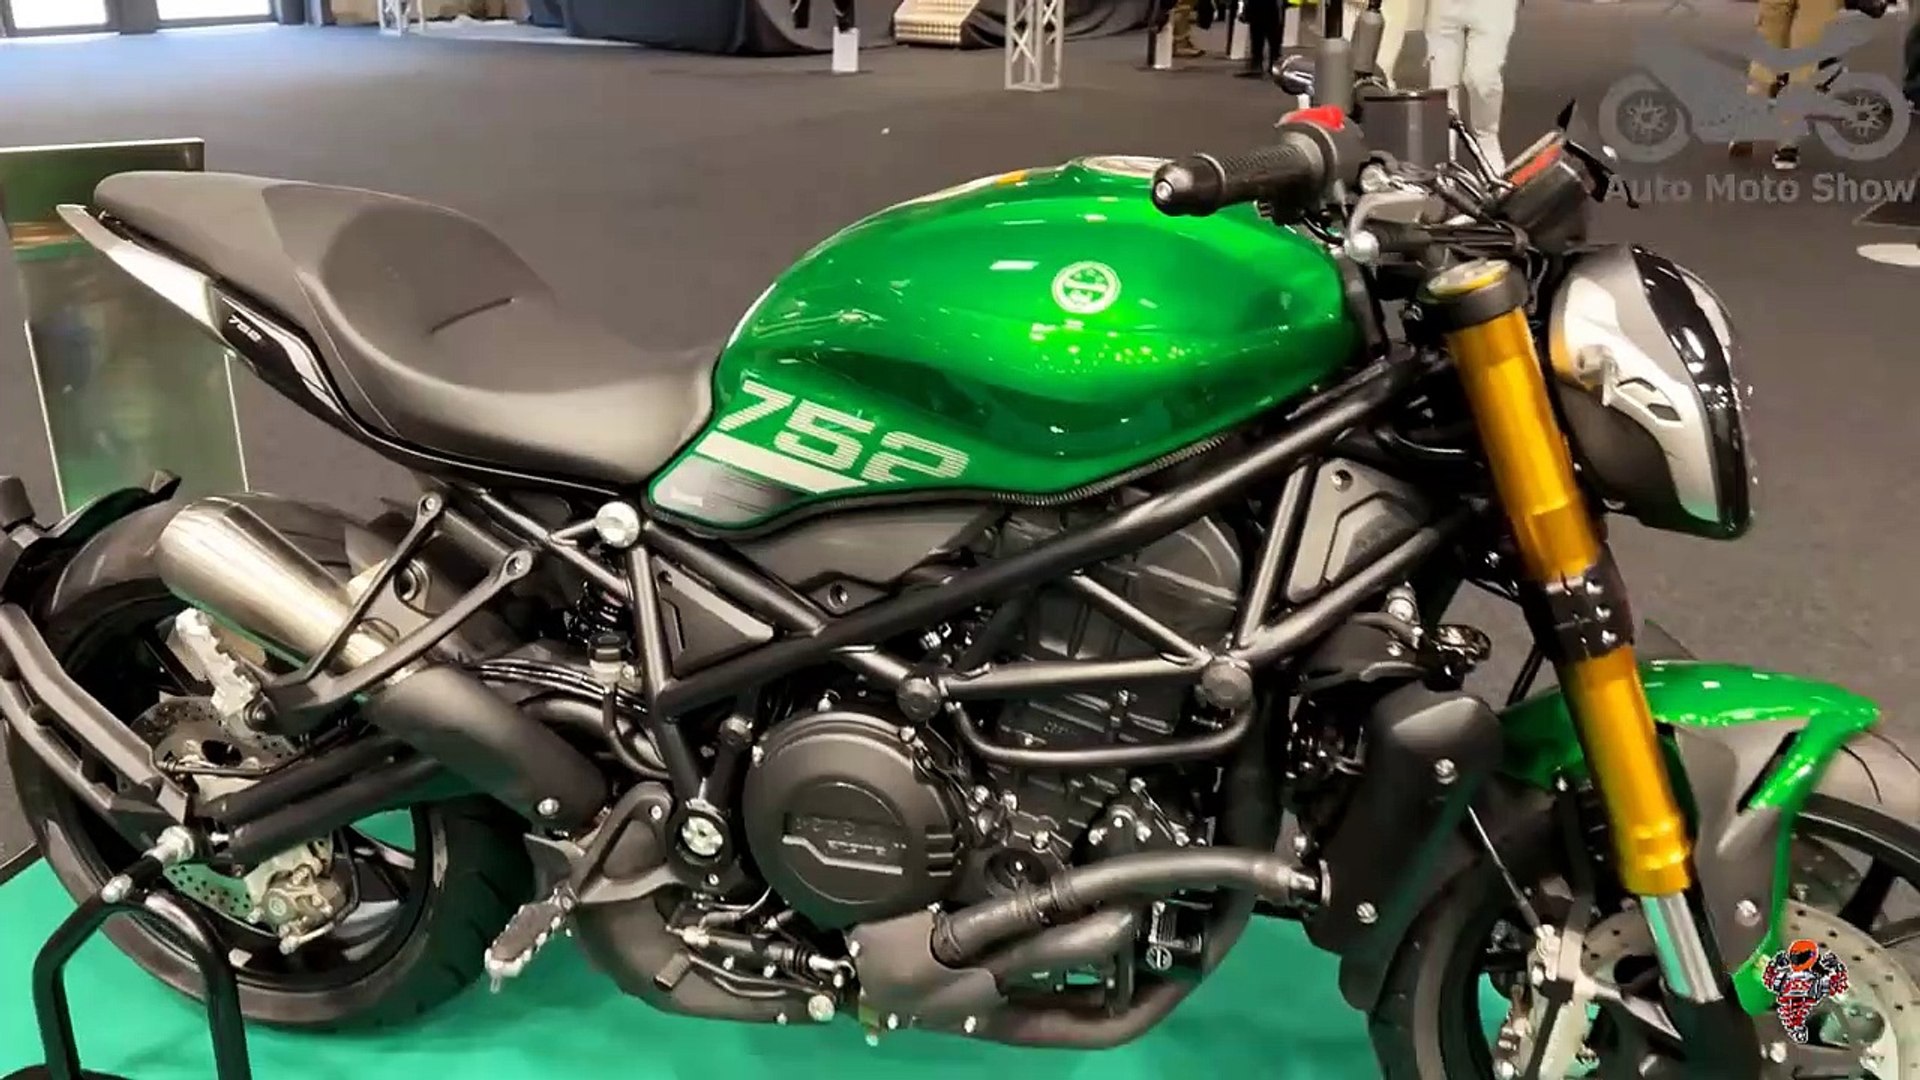 15 Amazing New 2022 Benelli Motorcycles at Motor Bike Expo 2022 - Vidéo  Dailymotion